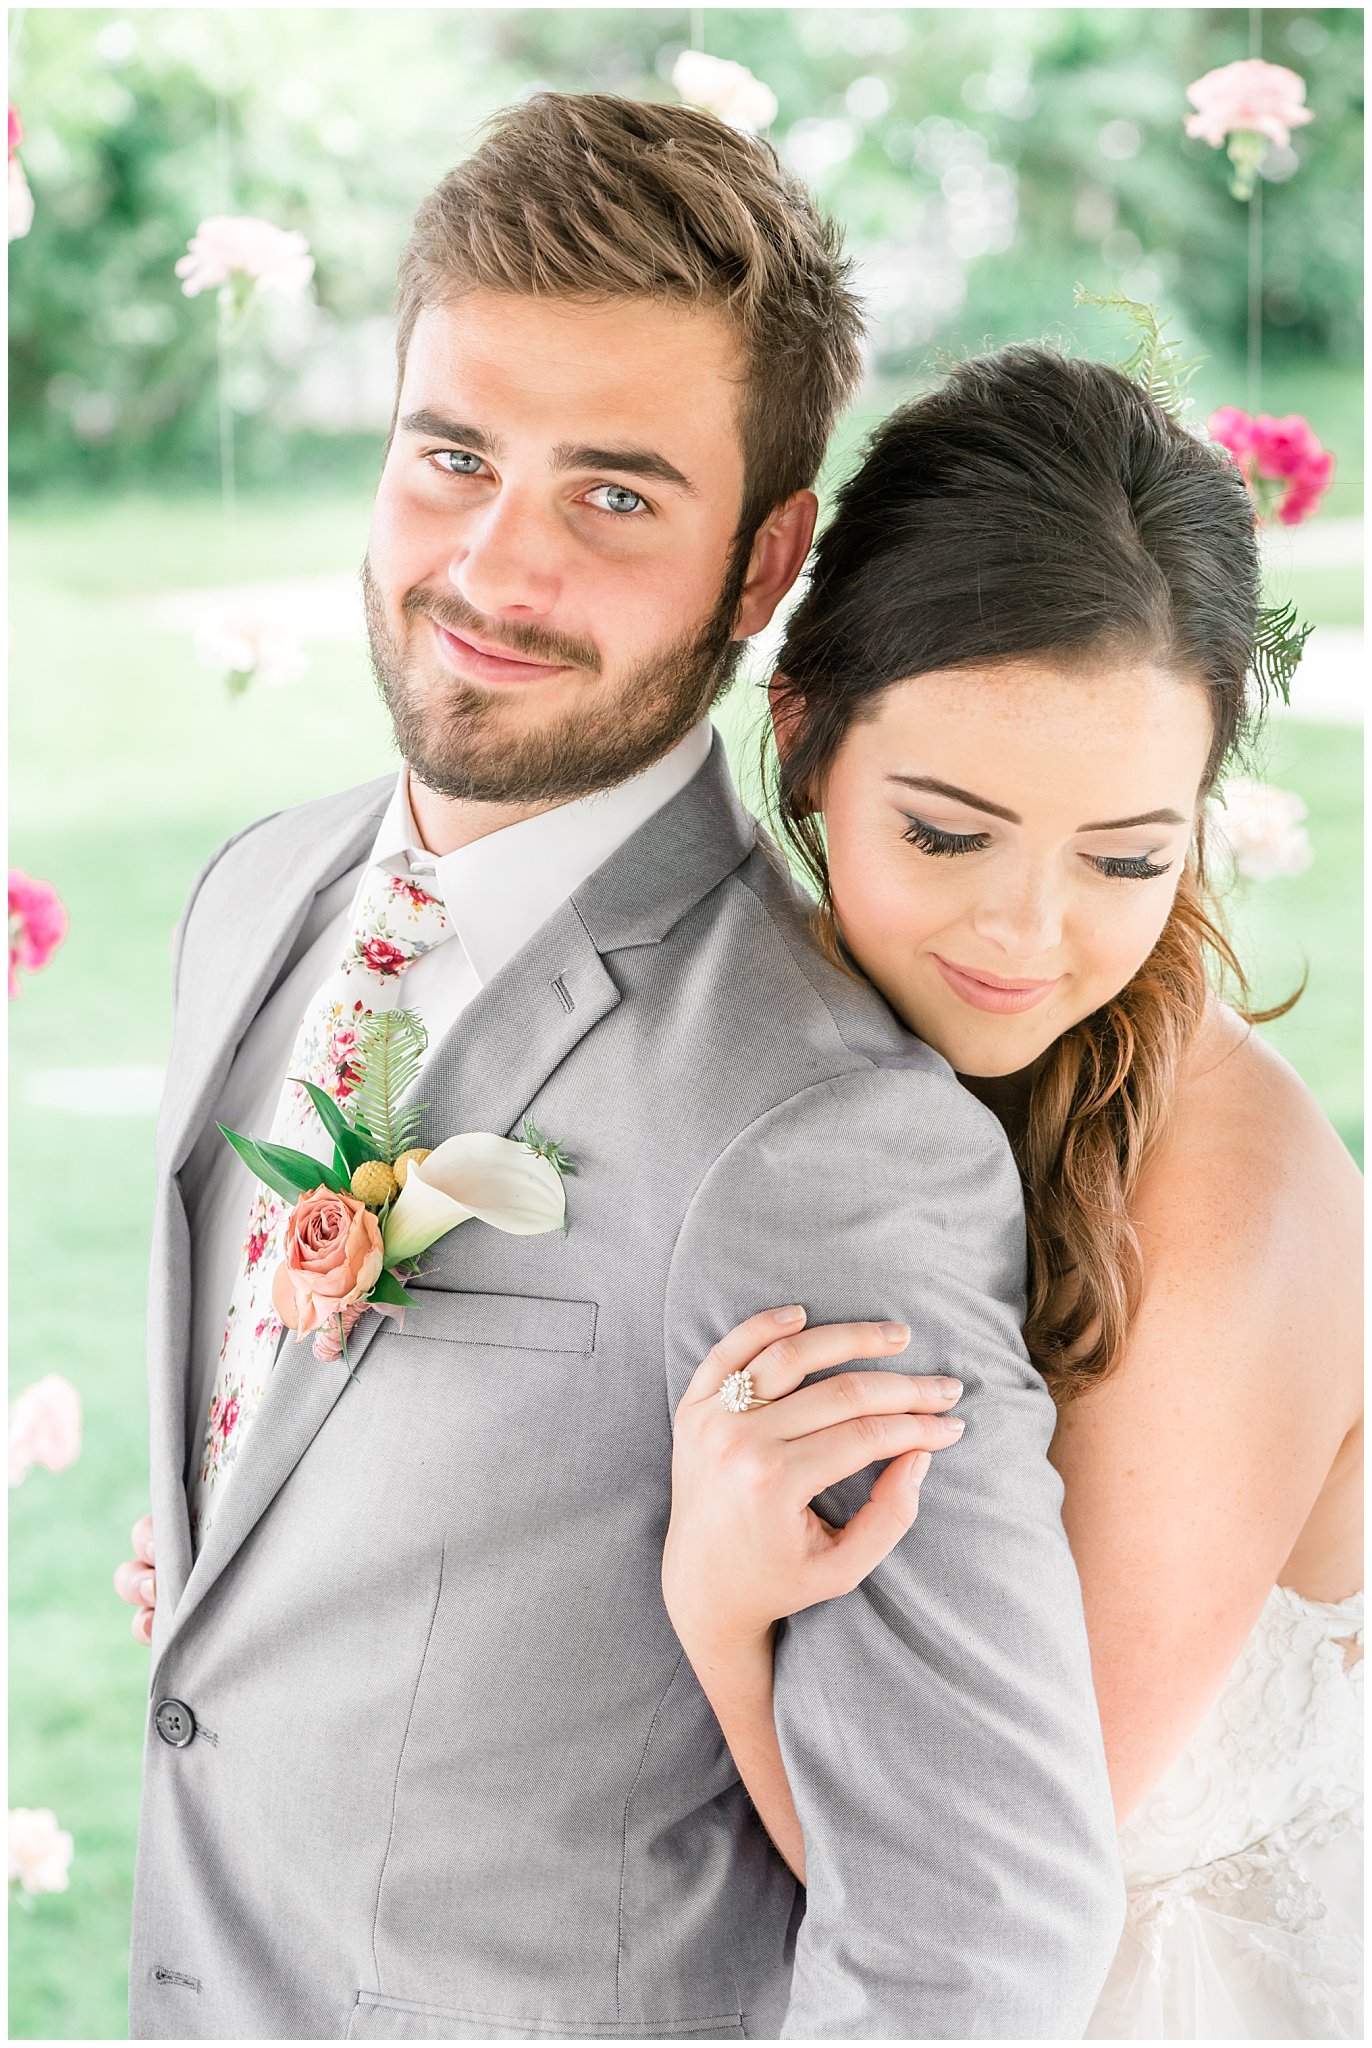 Bride admiring groom | This is the Place Heritage Park | Green and Pink Garden Wedding | Jessie and Dallin Photography